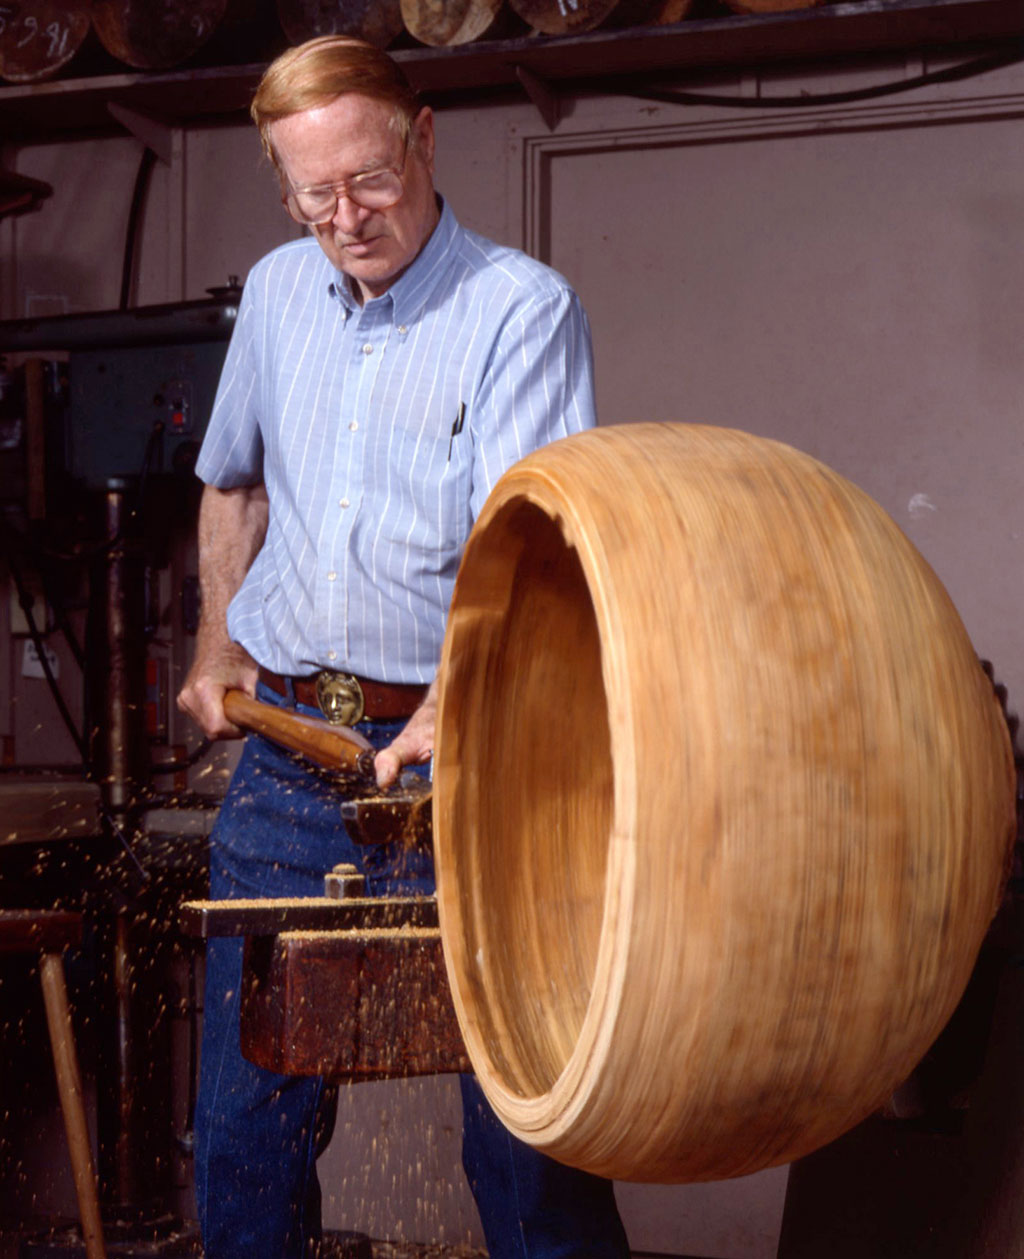 Ed Moulthrop at the lathe. Paul G. Beswick photograph